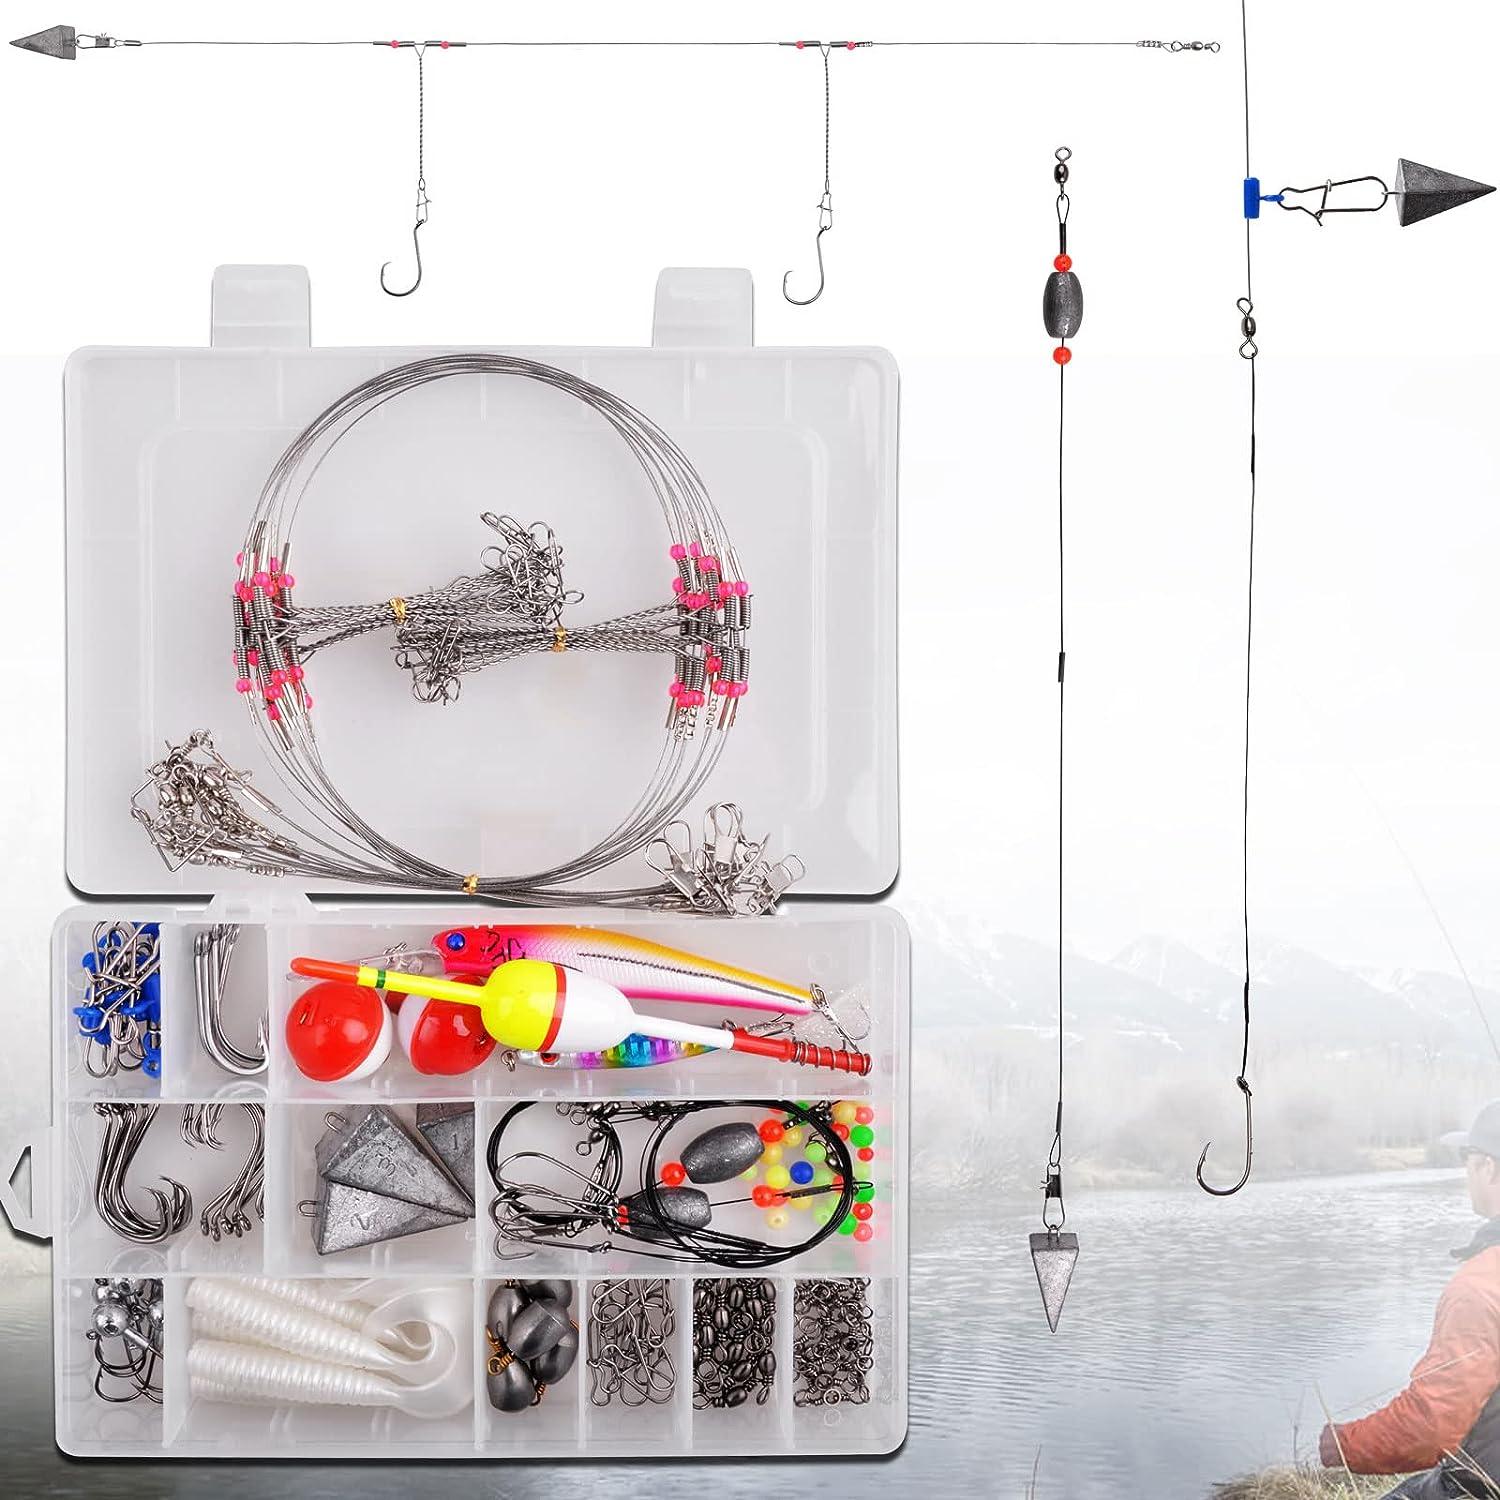  Saltwater Surf Fishing Leader Rig – 46pcs Pyramid Sinker  Octopus Circle Hook Forged Hook Wire Trace Leader Rig with Swivel Snaps  Beads : Sports & Outdoors